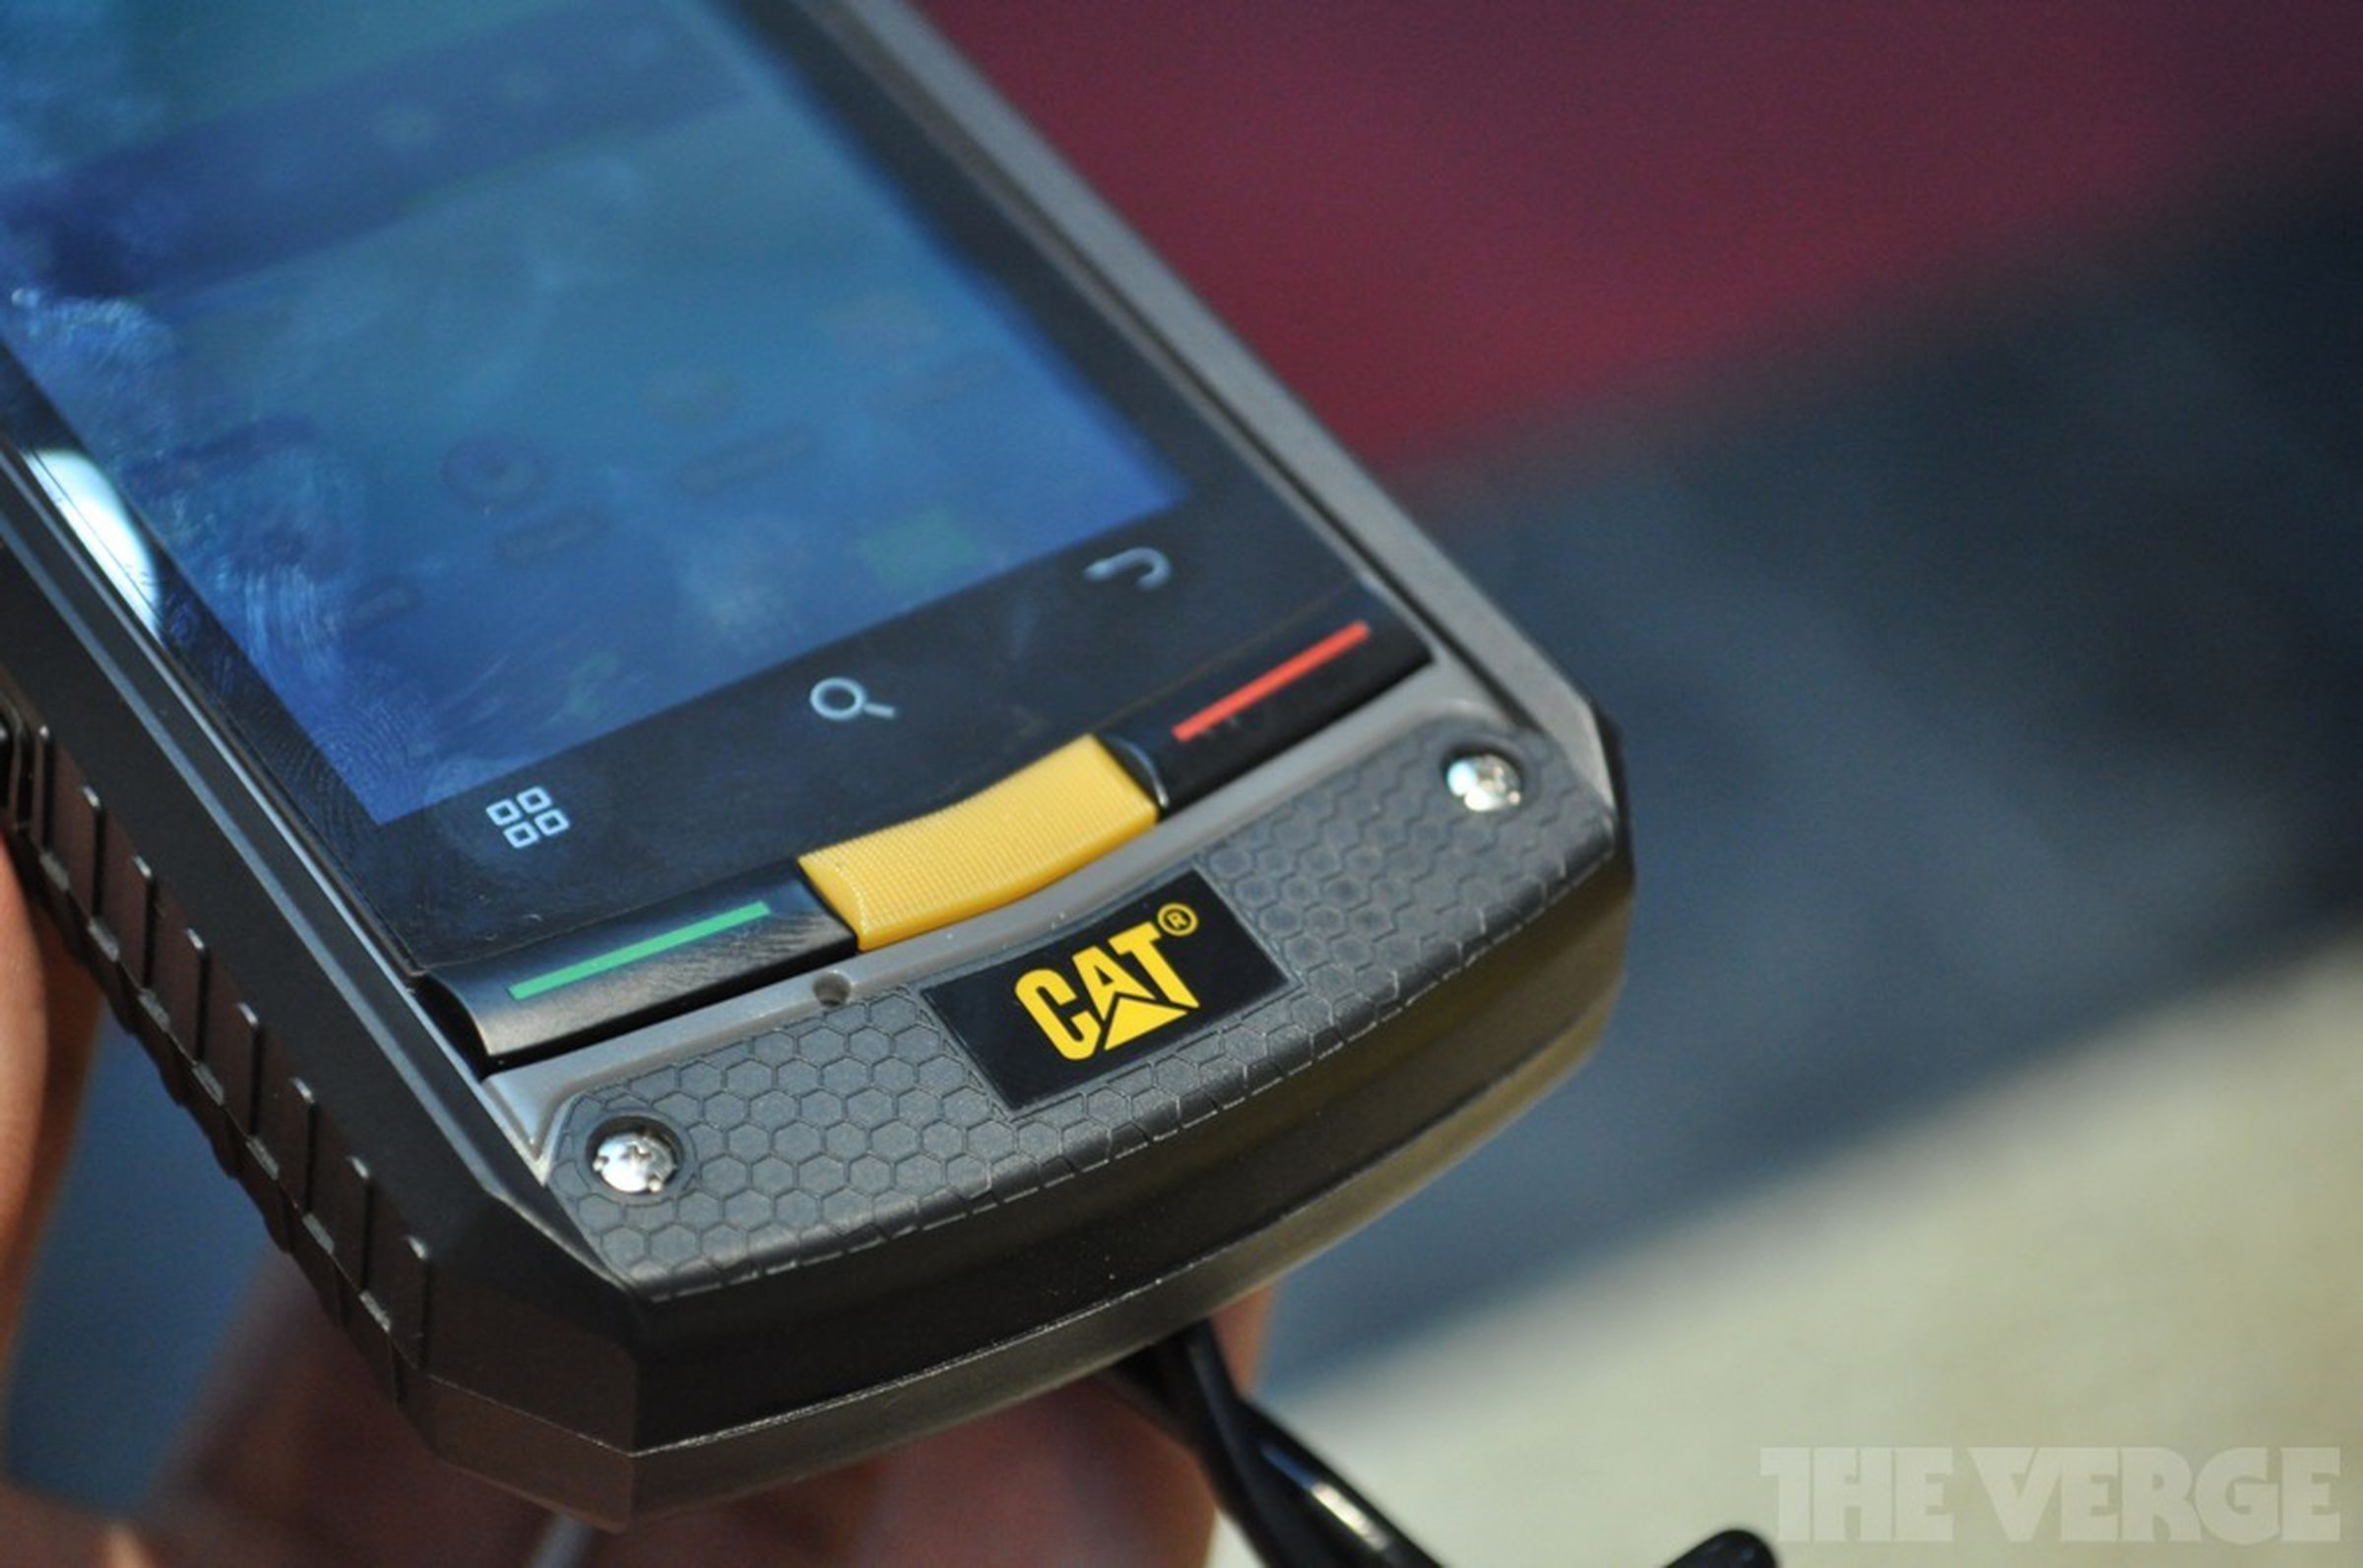 Caterpillar CAT B10 rugged smartphone hands-on pictures